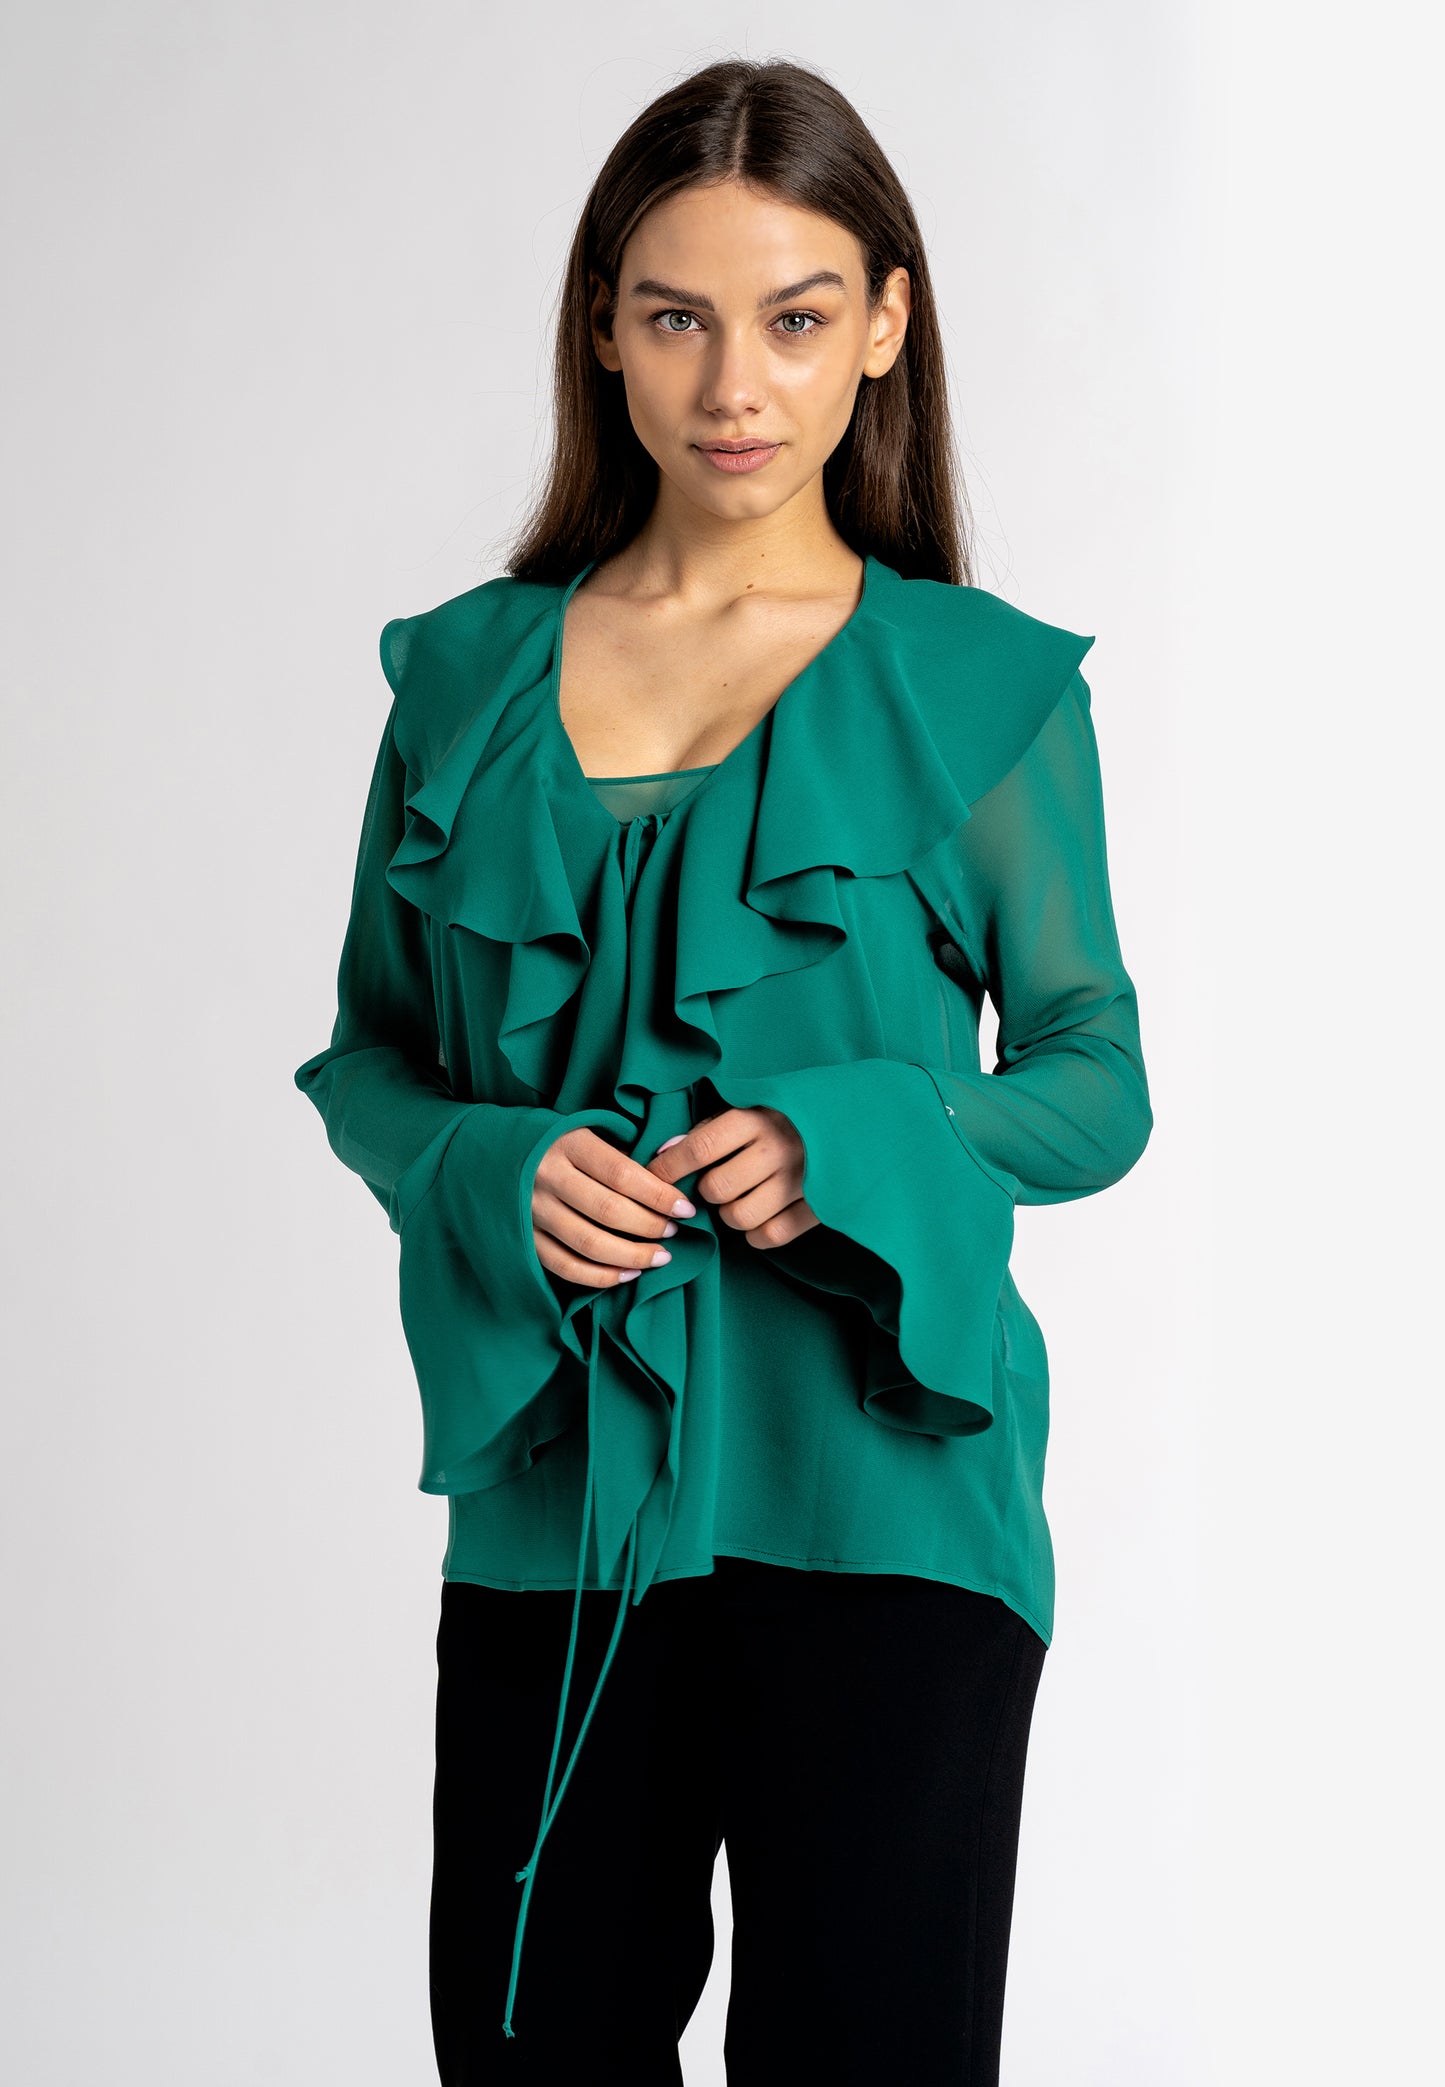 ruched shirt green ruffle  blouse  ruffle blouse long sleeve ruffled blouse green ruffle blouse  green ruffle tops  long sleeve ruffle tops  viscose ruffle top  ruffle sleeve blouse  green blouse  designer ruffle top maxi ruffle made in italy clothing sustainable clothing australia  ethical australian clothing  sustainable dresses australia 